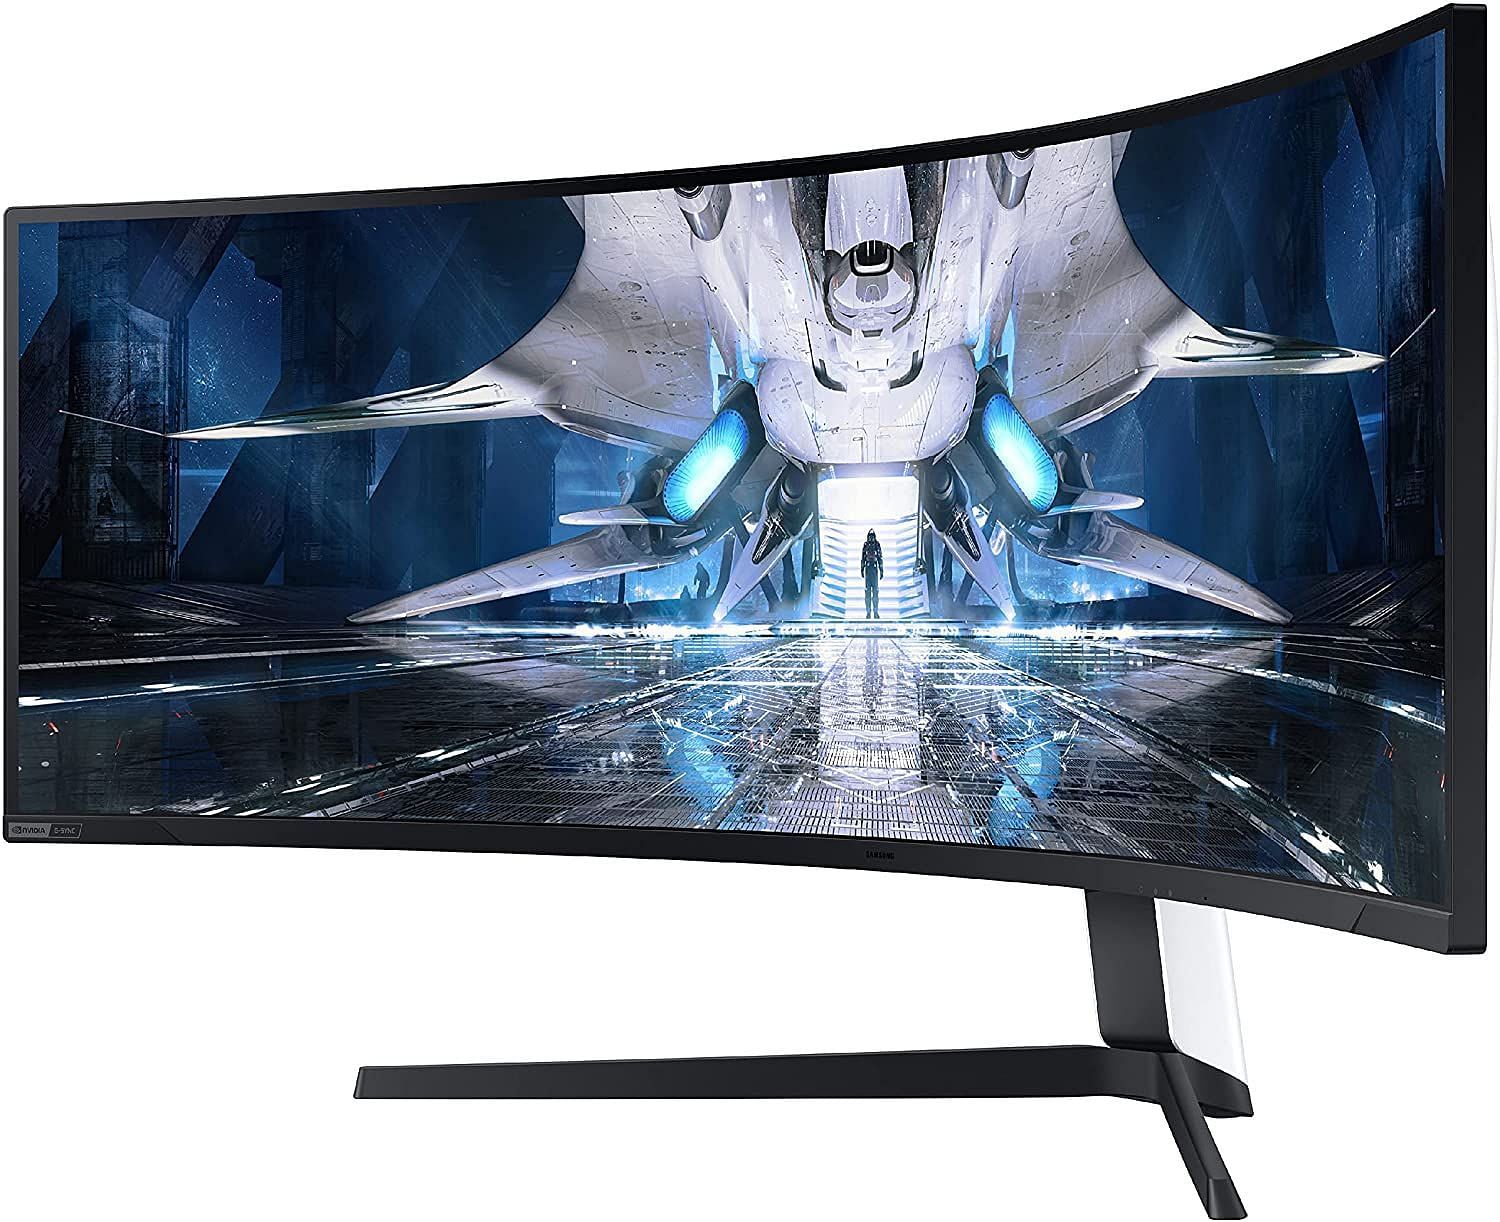 5 best high refresh rate gaming monitors in 2022